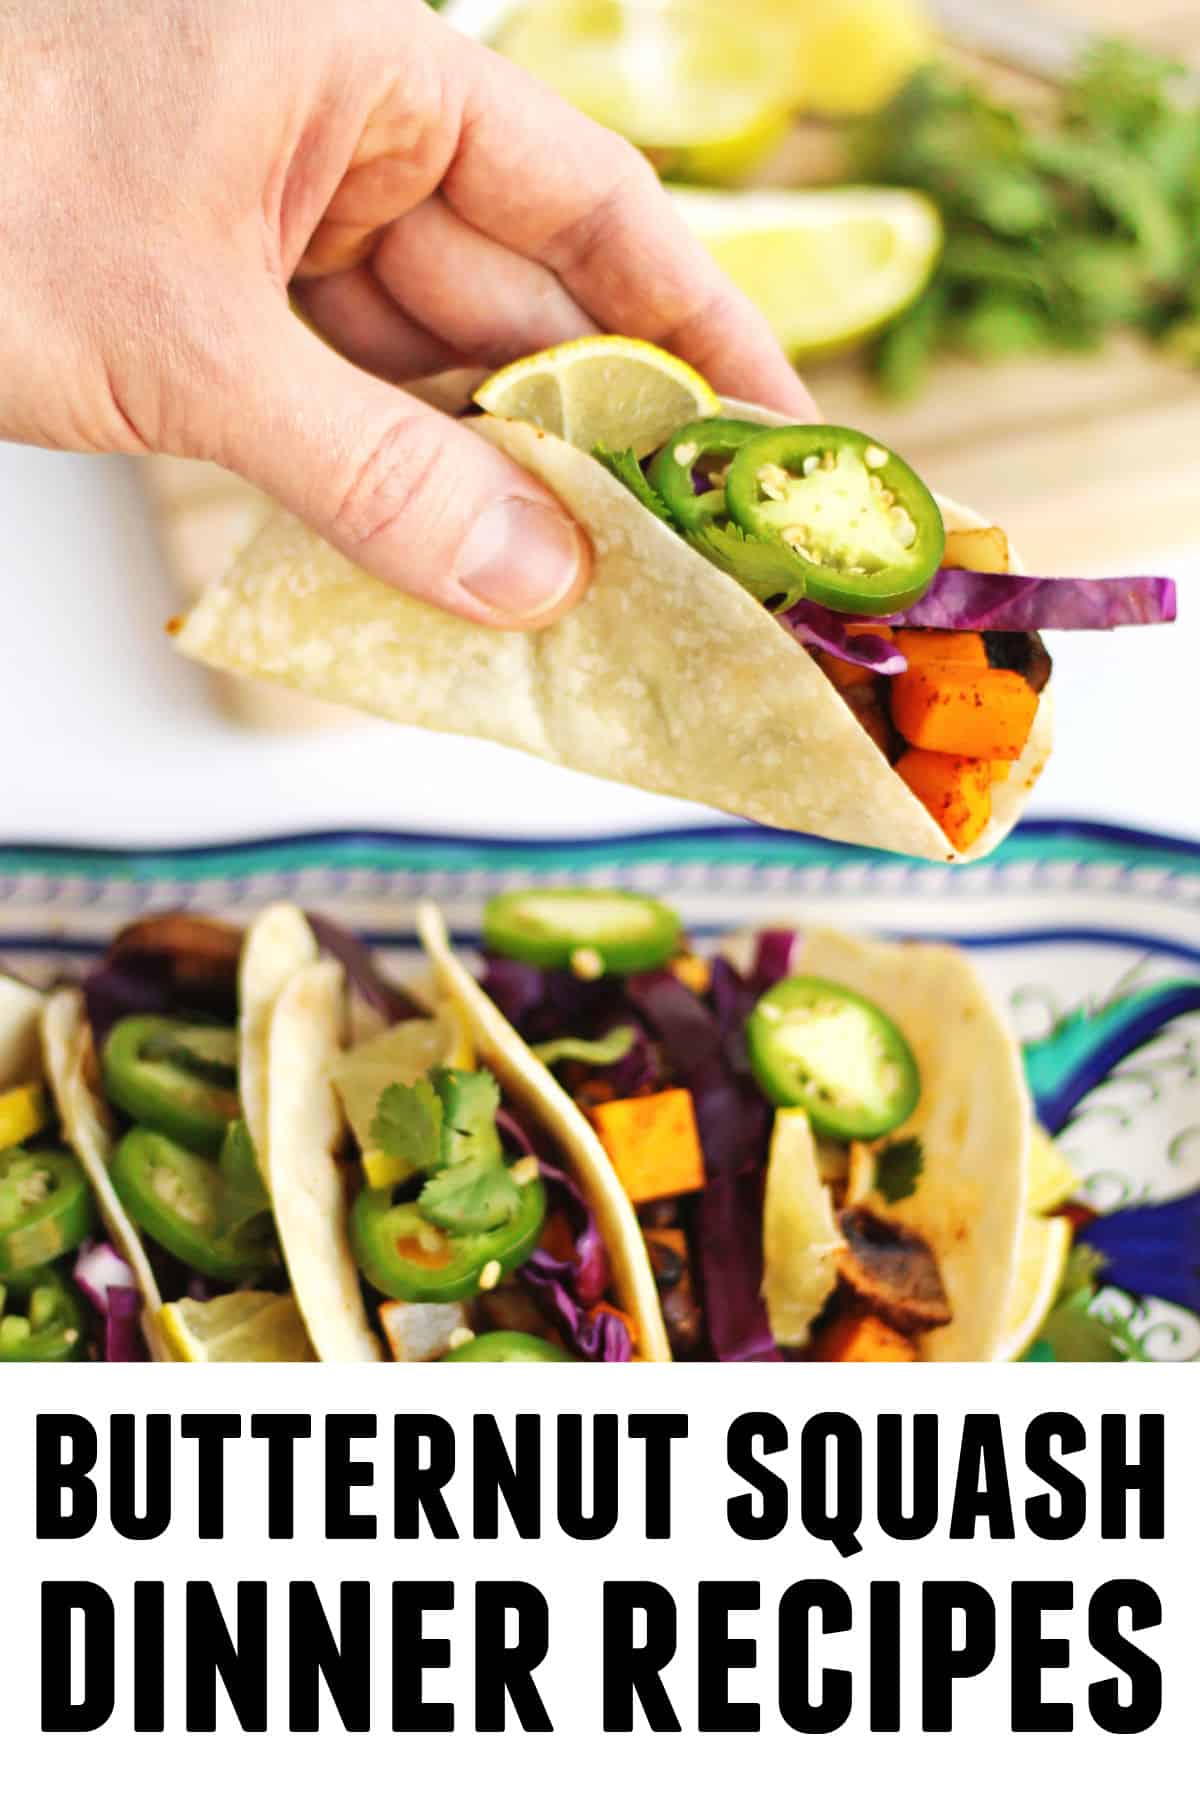 A photo of a hand holding a butternut squash taco with text on the bottom that says, "butternut squash dinner recipes."